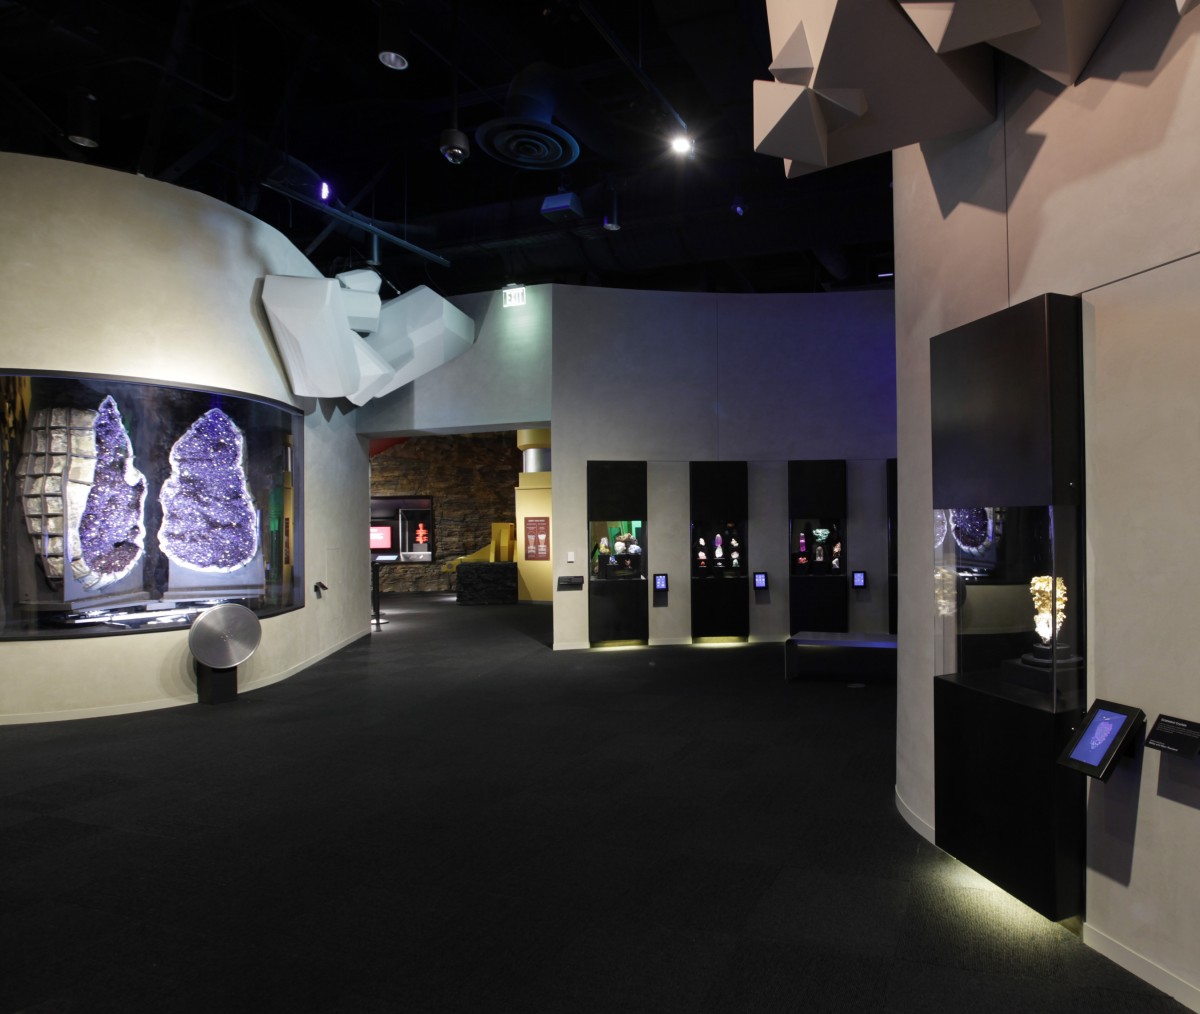 Perot Museum - Gems and Mineral Hall | iRocks.com